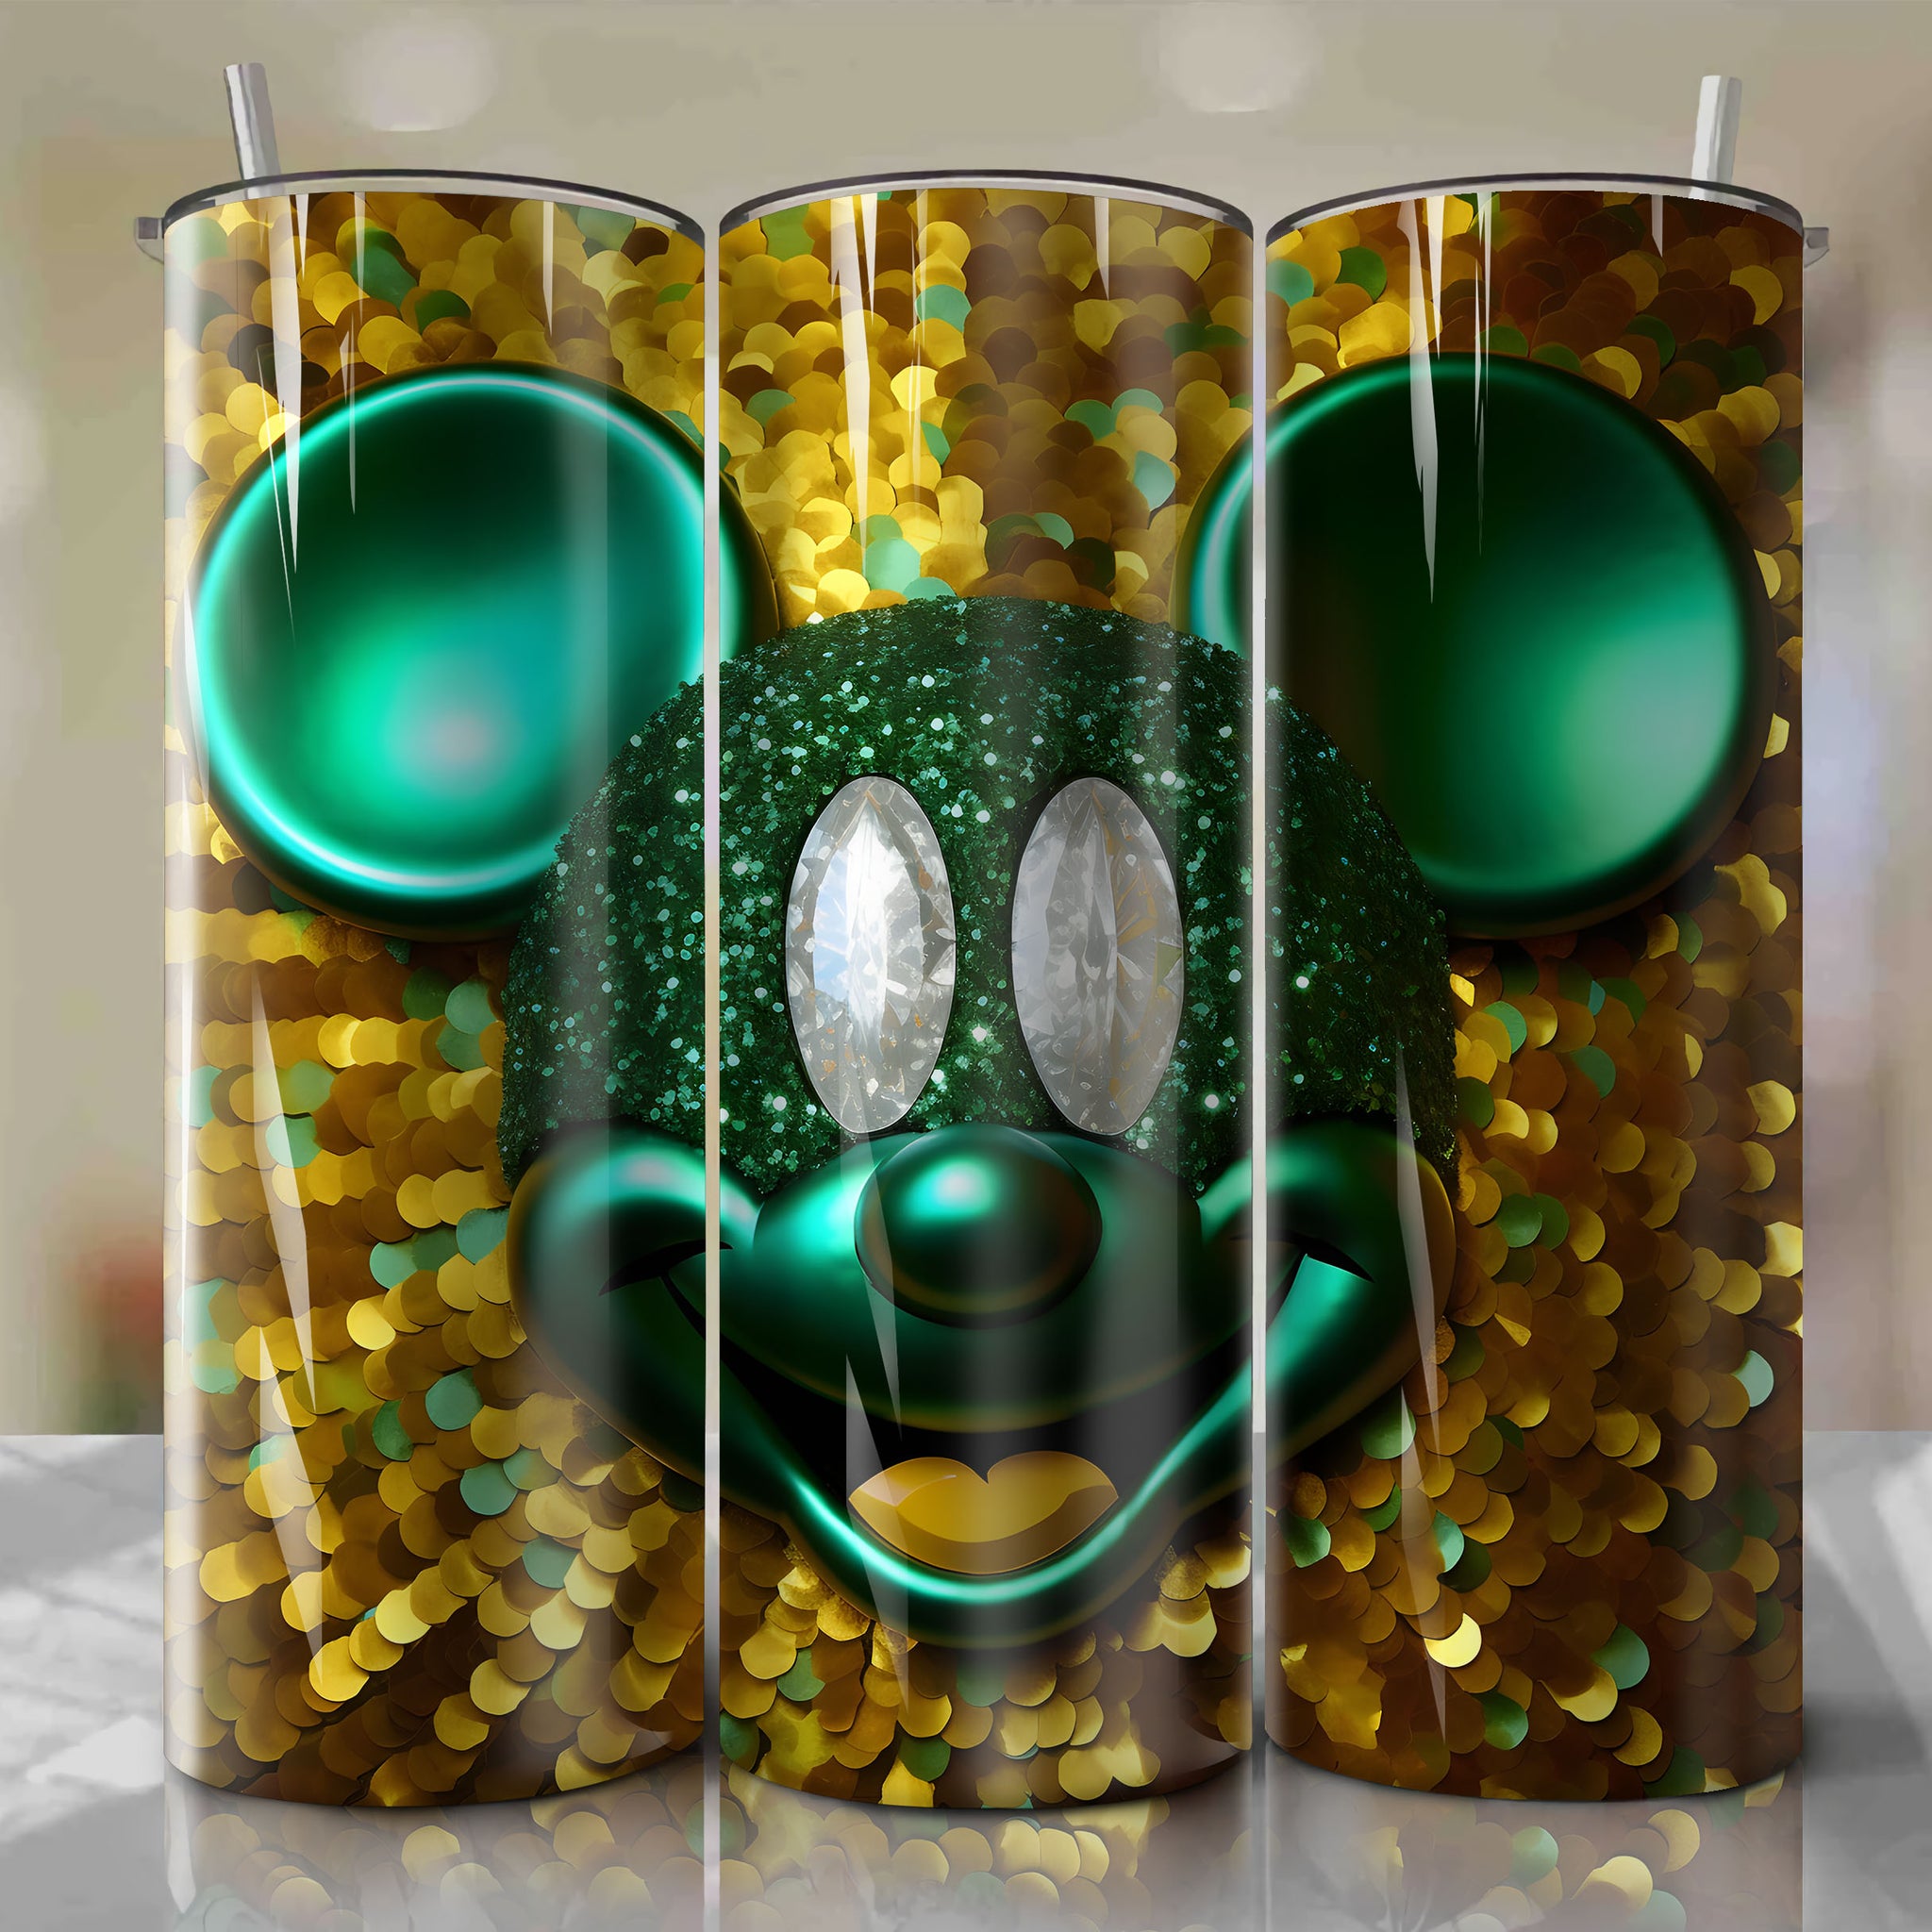 Dazzling 3D Bling Mickey Mouse Face Illustration - Digital Download for Sublimation Projects